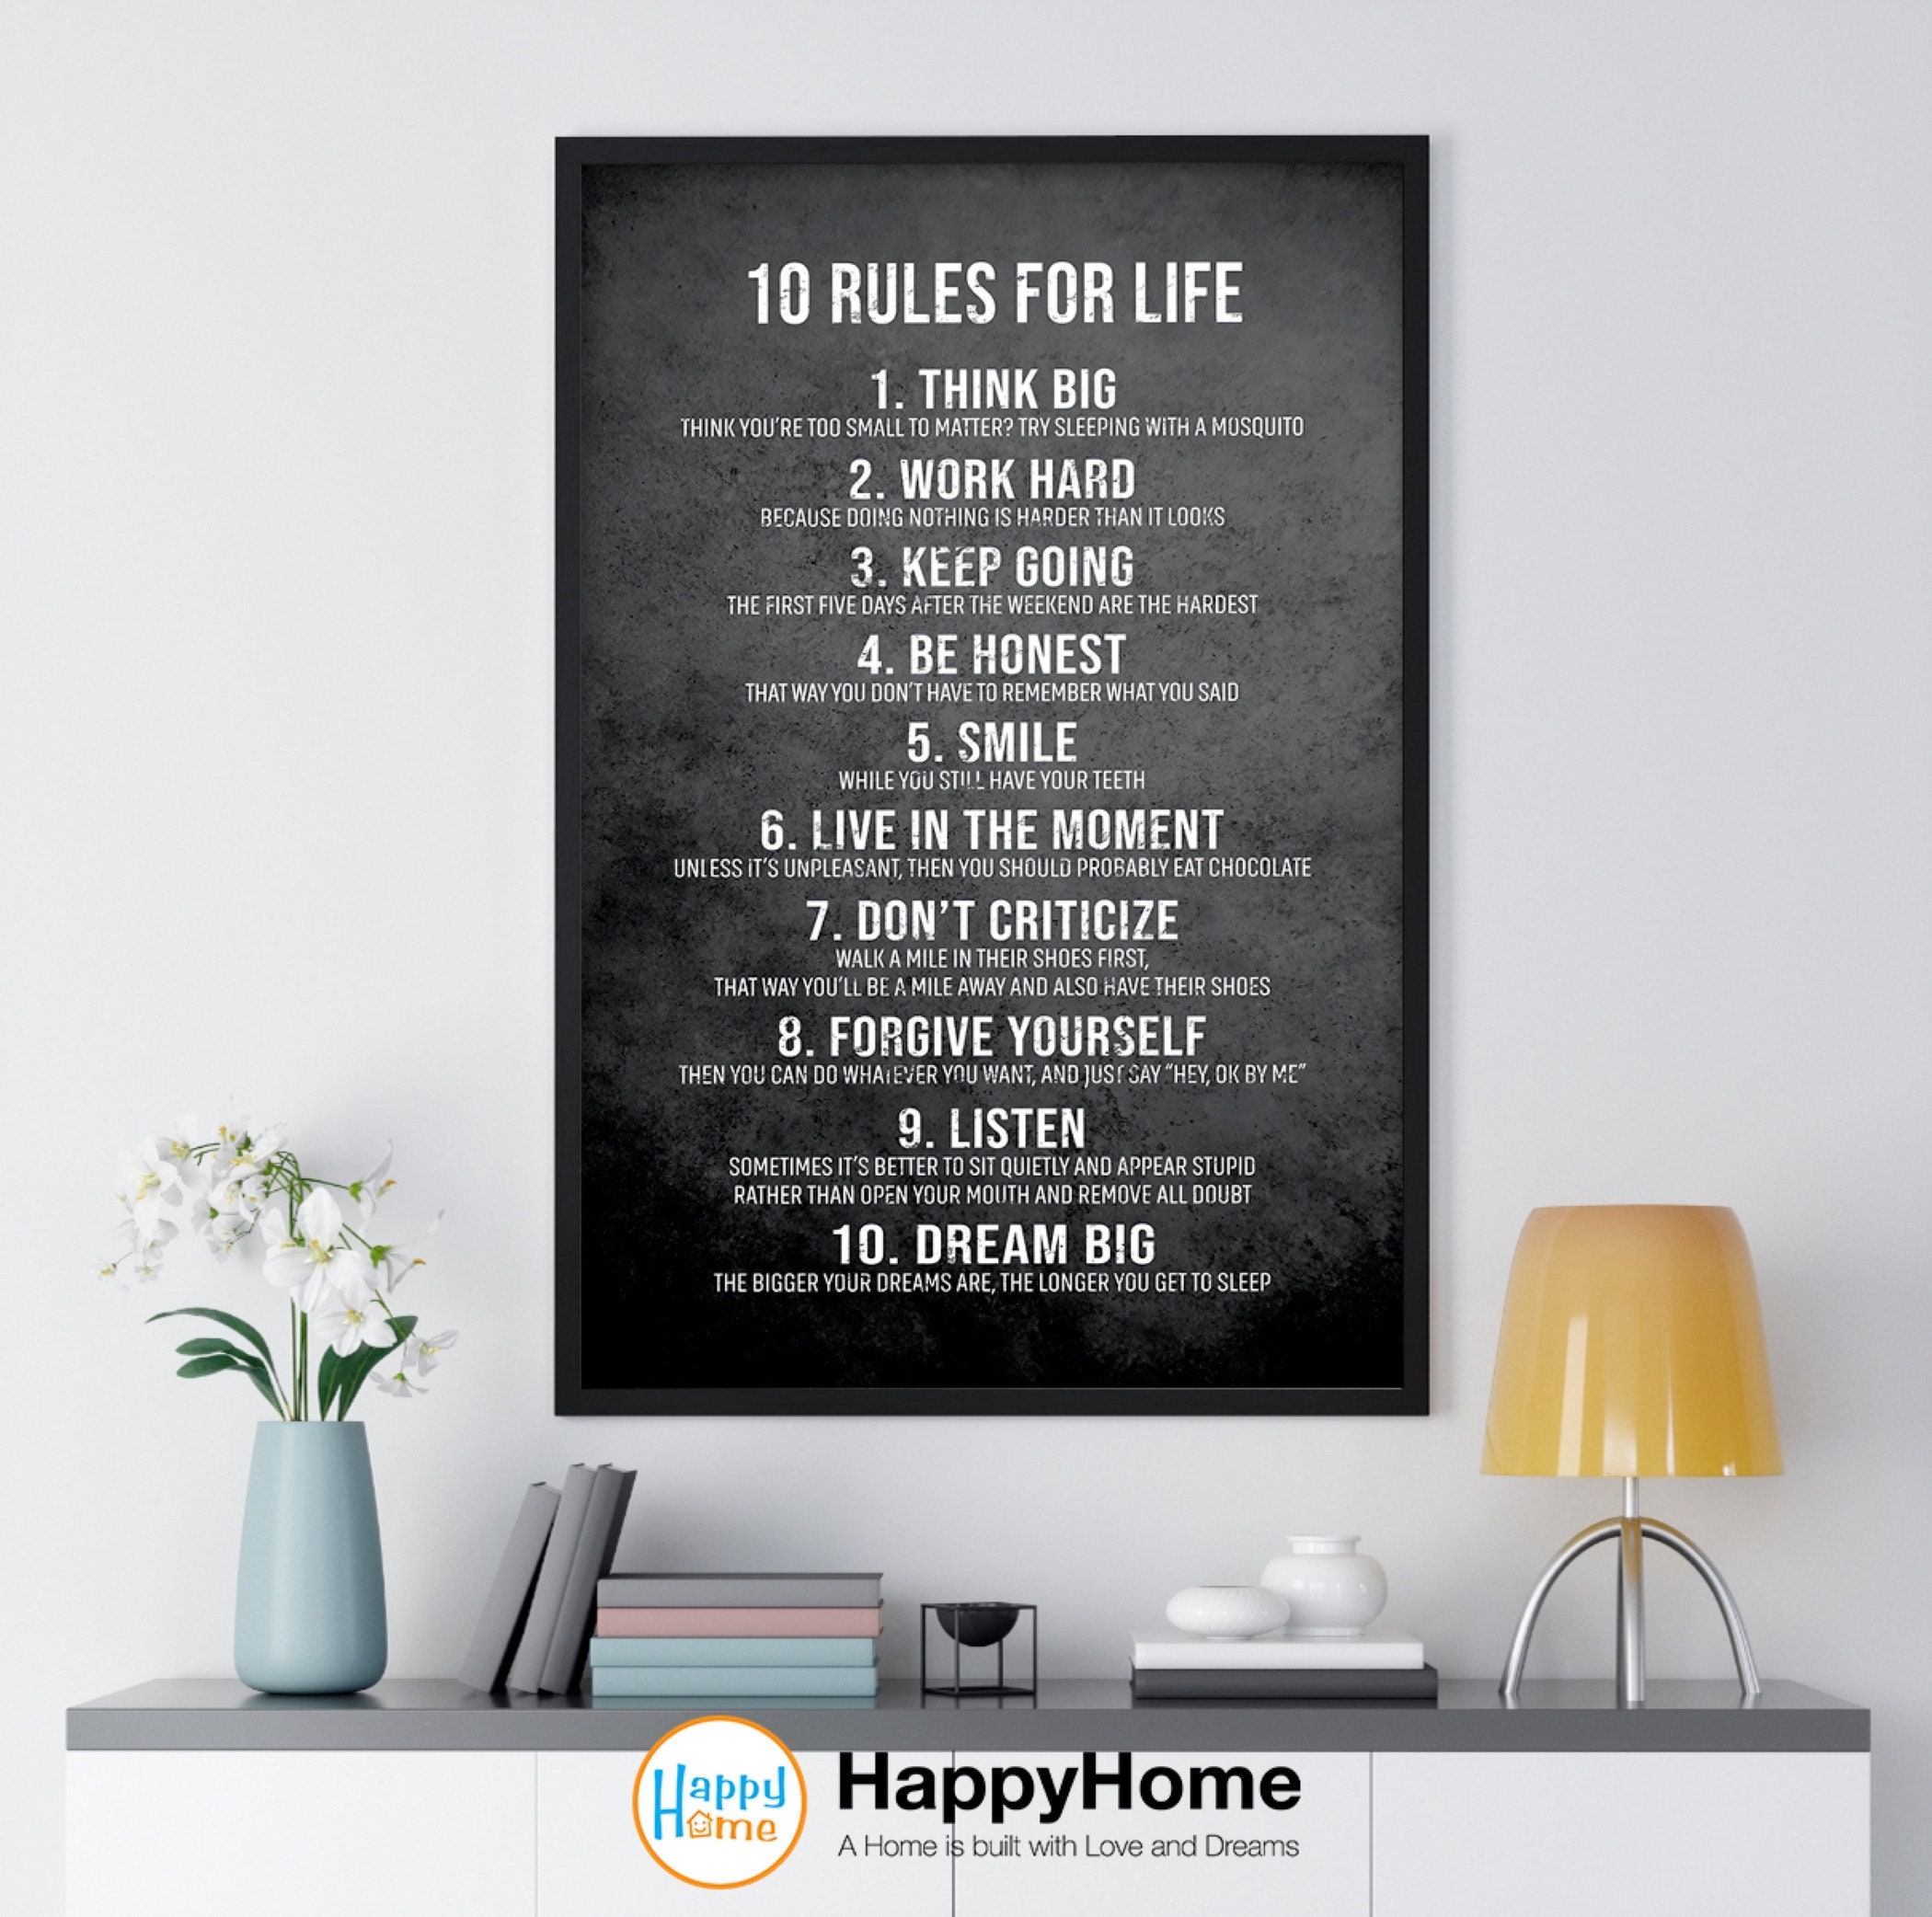 10 HAPPY HOME MUST-HAVES 